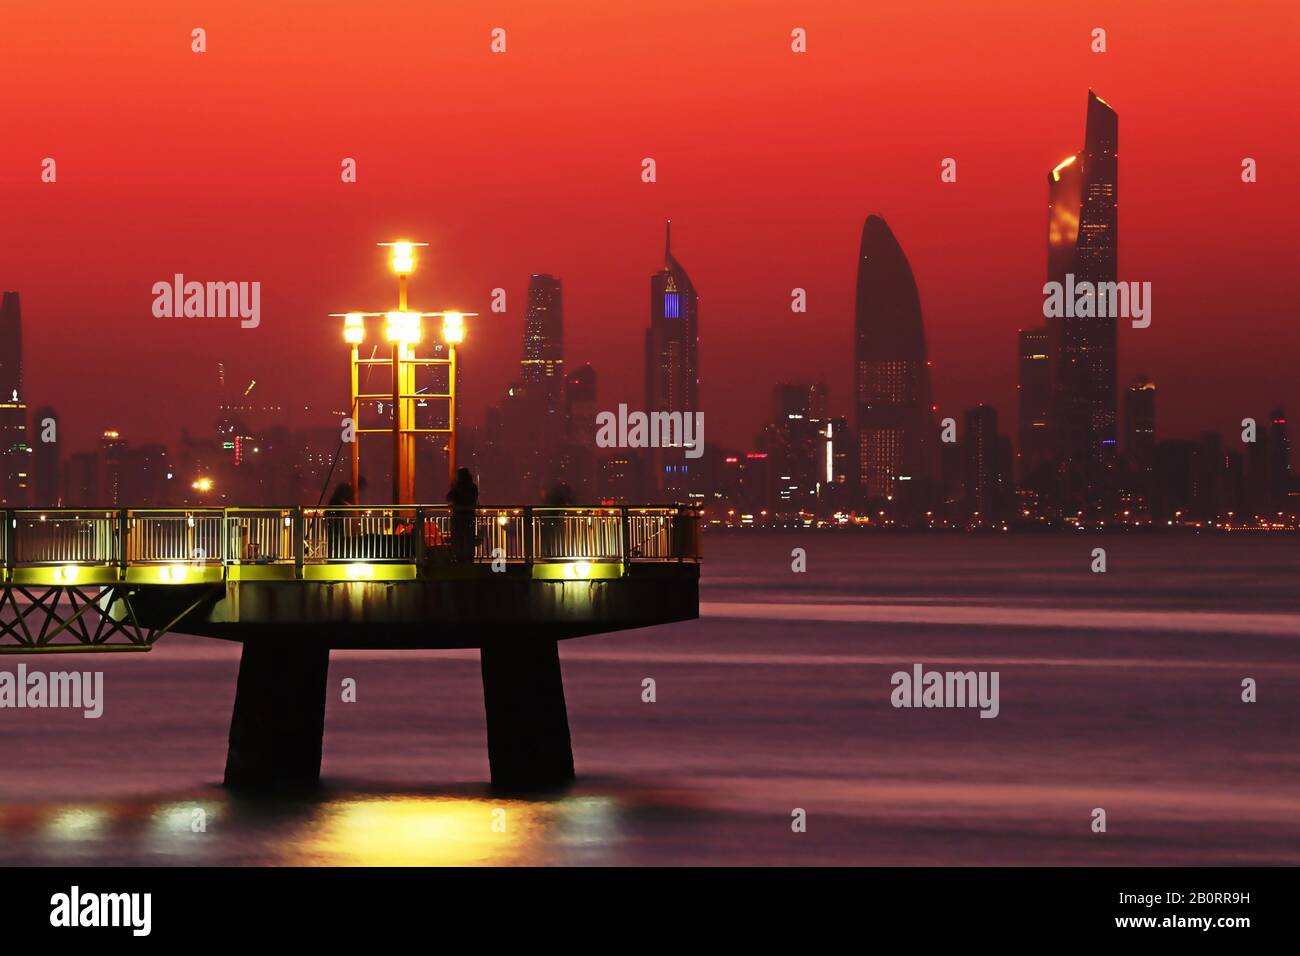 Pier with lights silhouetted against the towers of the skyline of Kuwait City at sunset Stock Photo